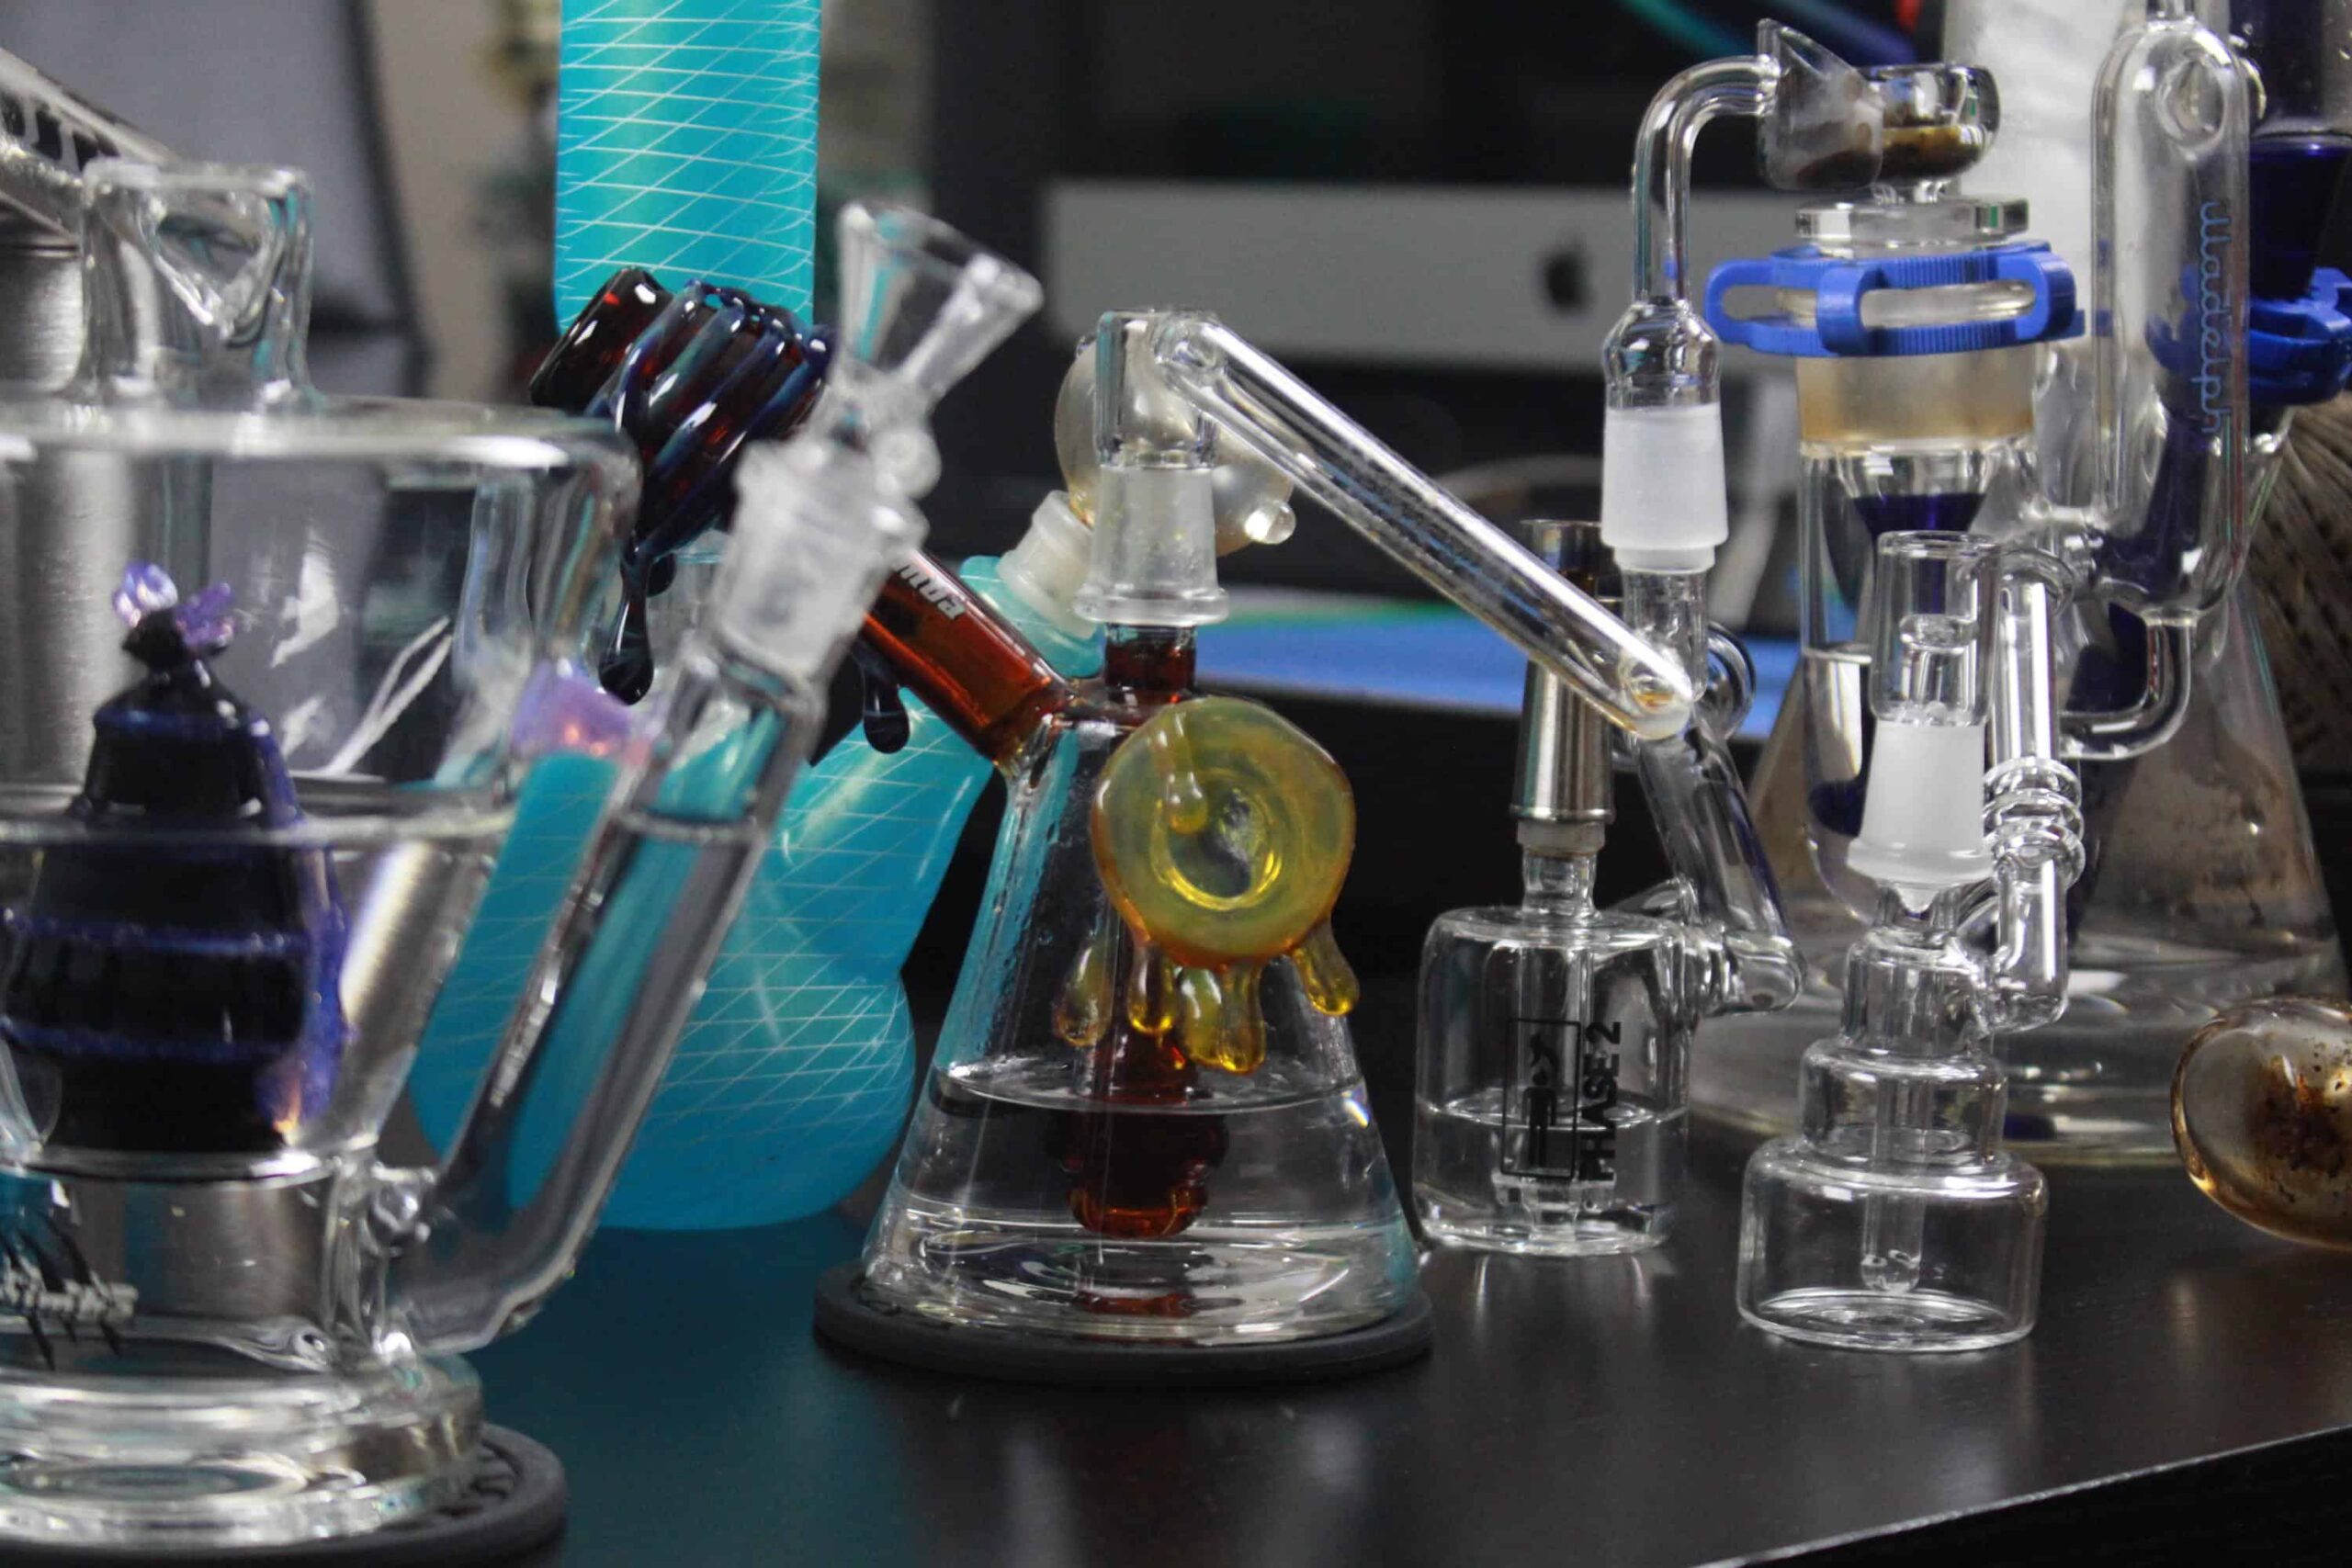 Examples of dab rigs used for inhaling cannabis concentrates like Live Resin